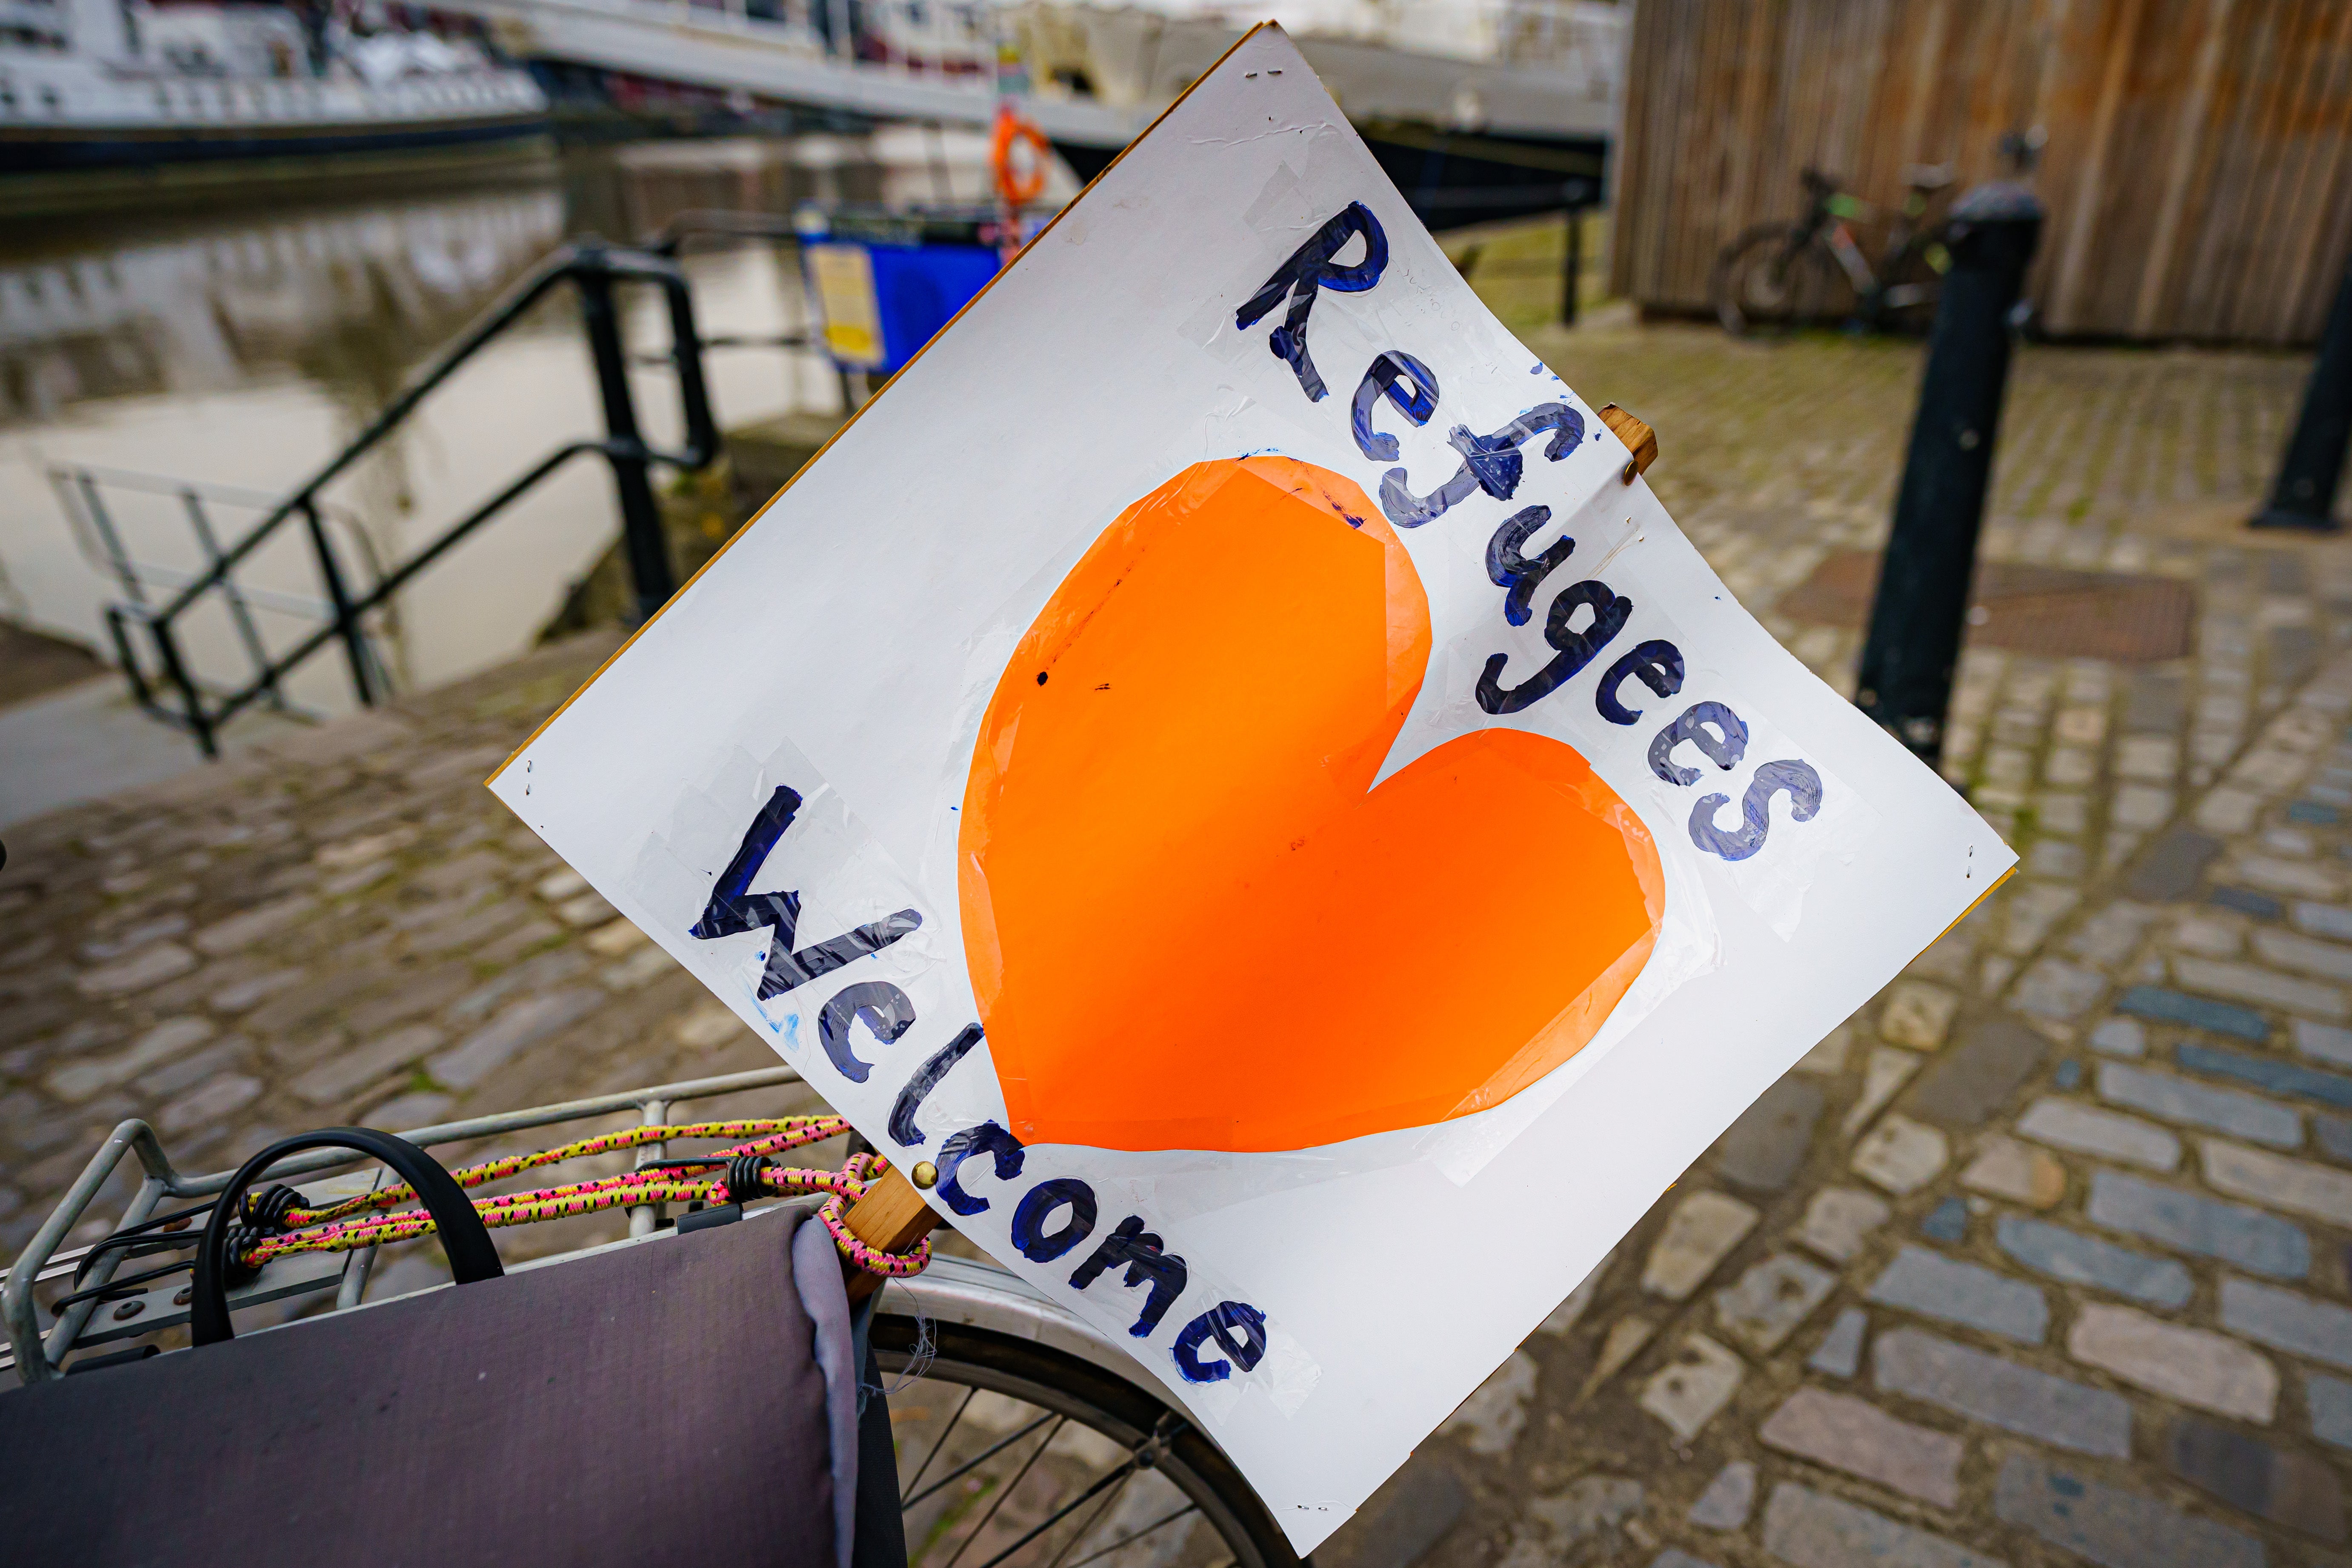 A ‘refugees welcome’ banner in Bristol in support of Ukrainian refugees